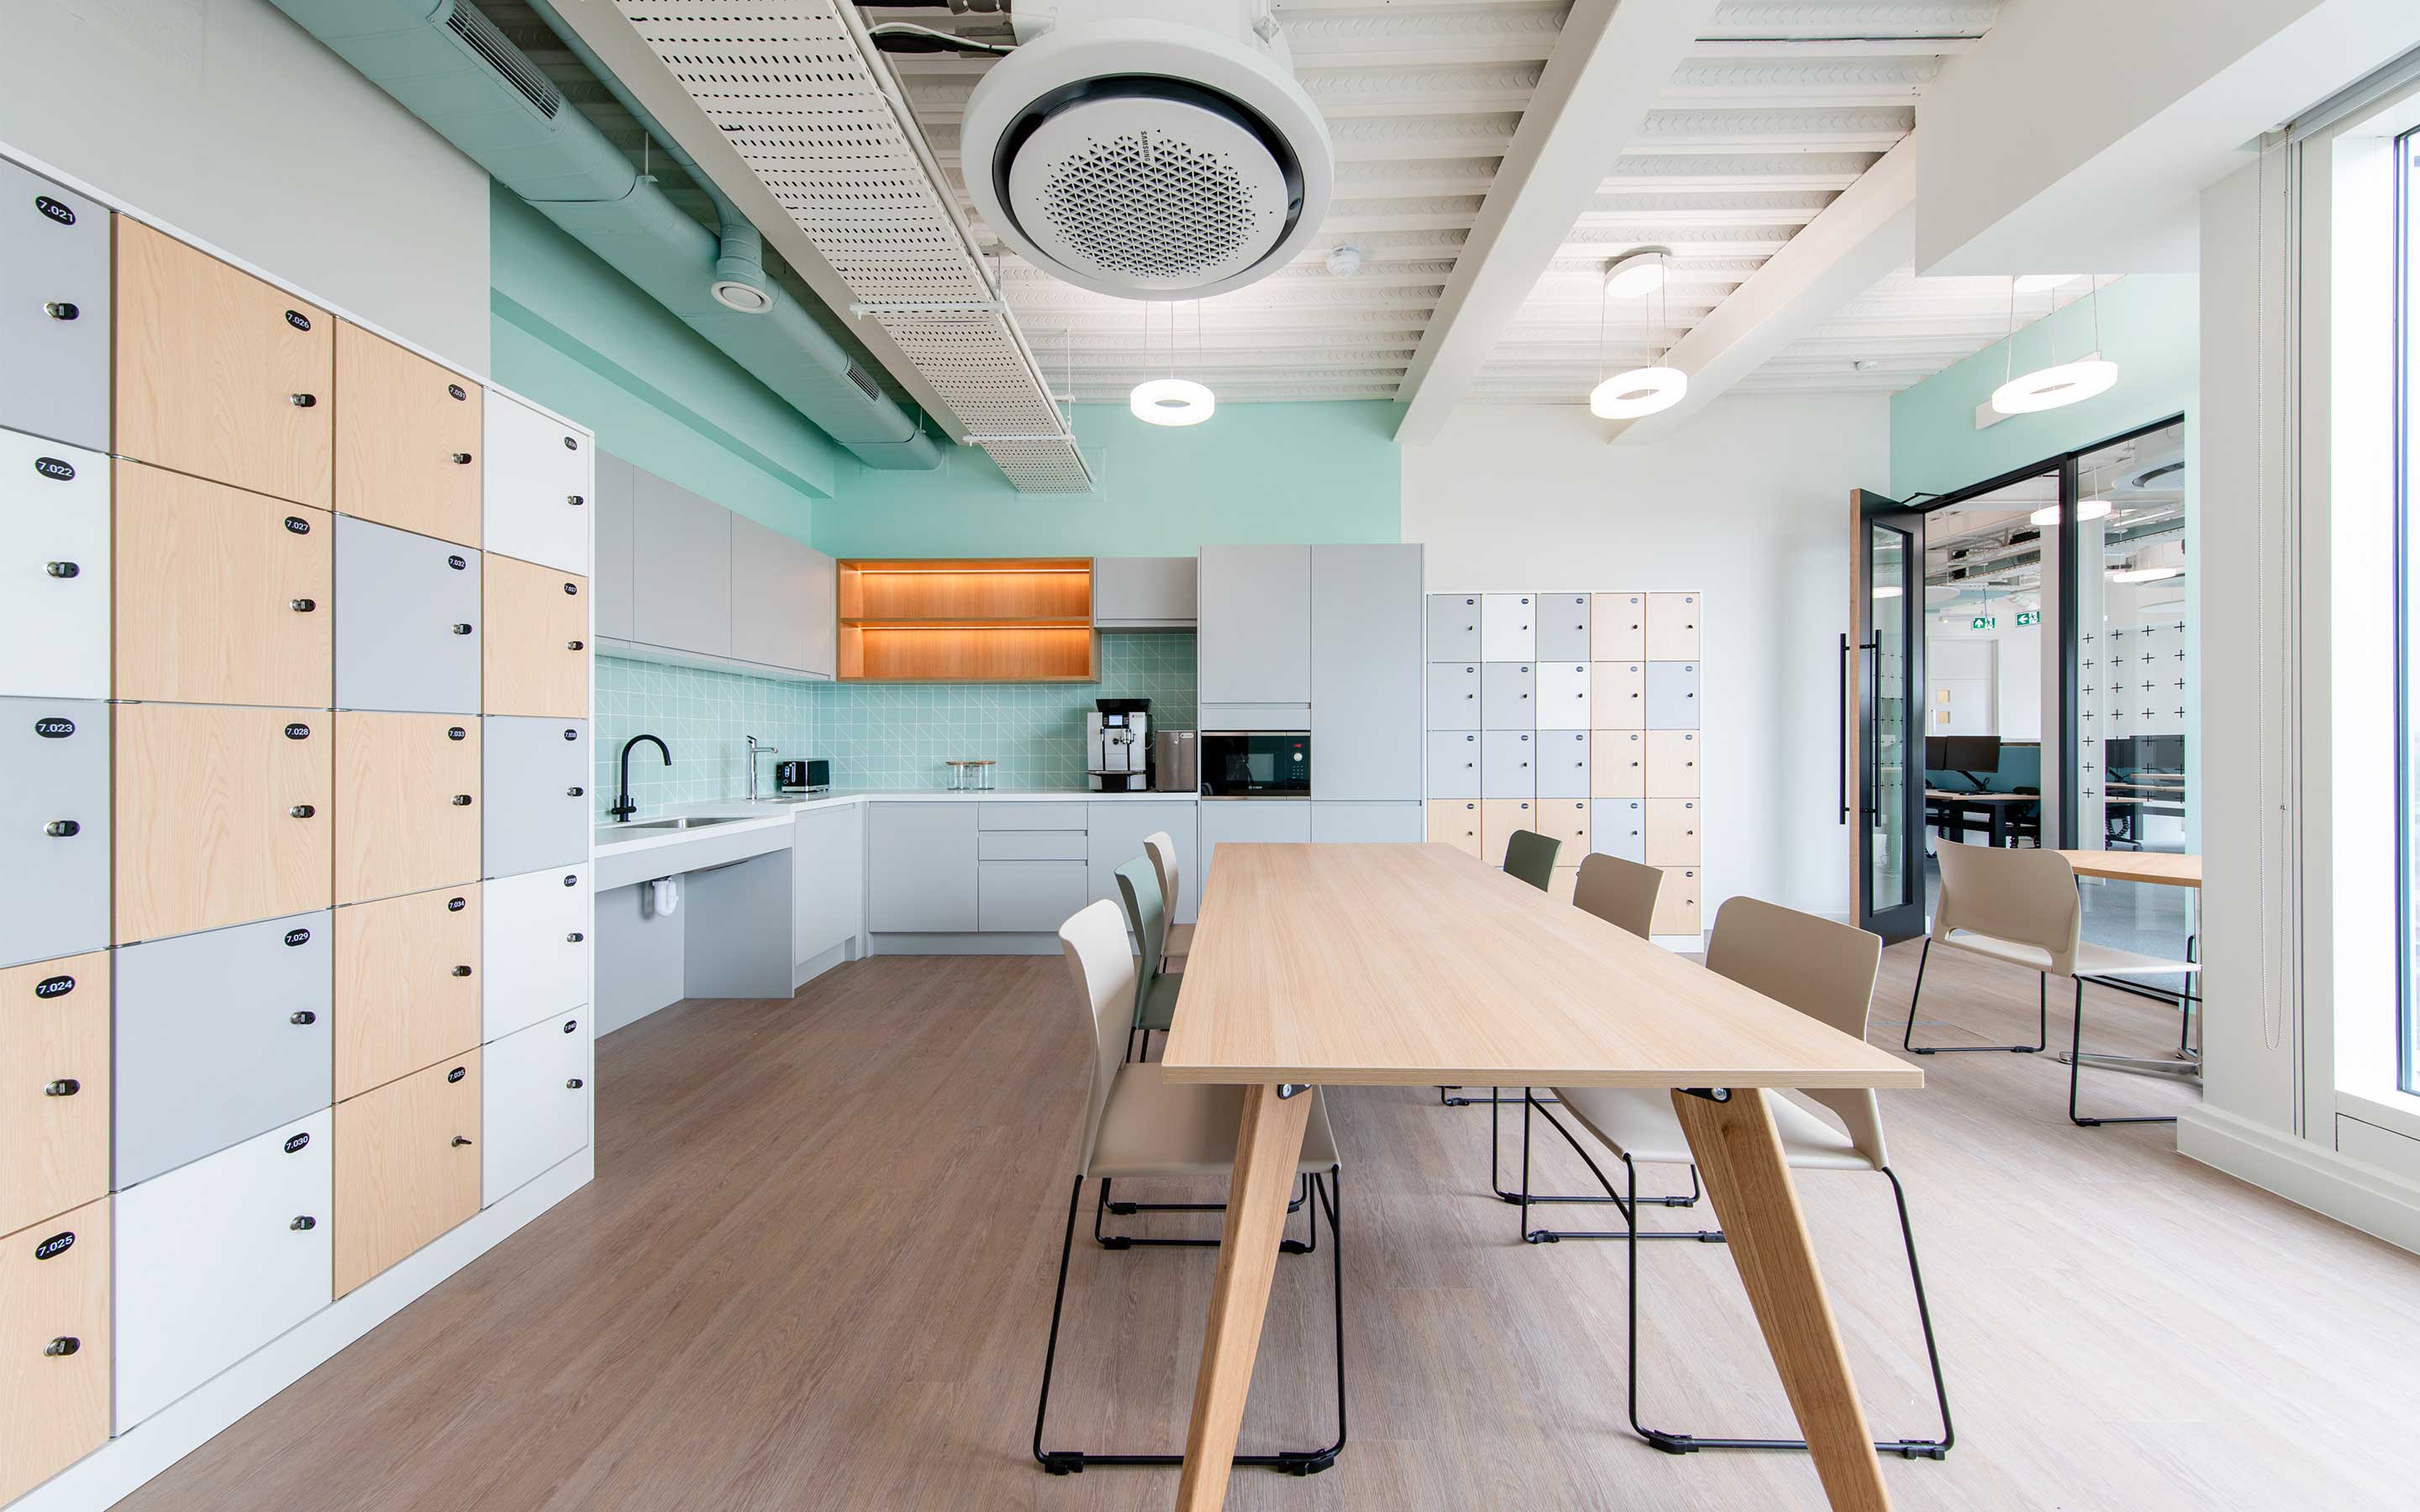 A bright kitchen in a sleek office interior design, with pastel finishes and a large table for socialising